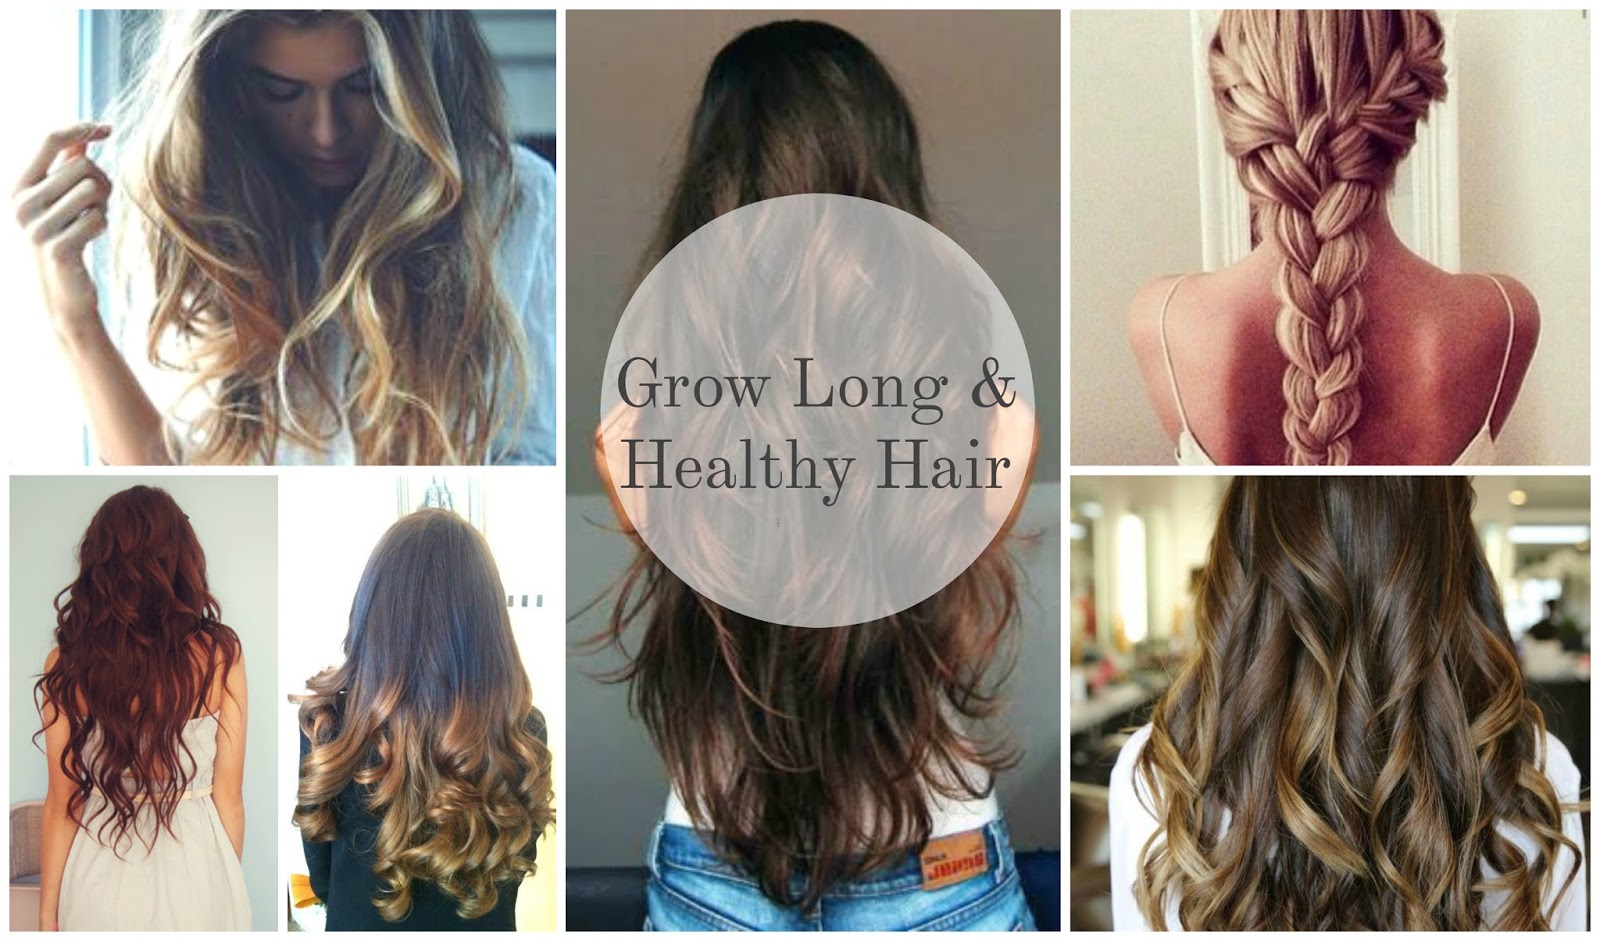 Hair Journey | Grow Long & Healthy Hair | Barely There Beauty - A Lifestyle  Blog from the Home Counties